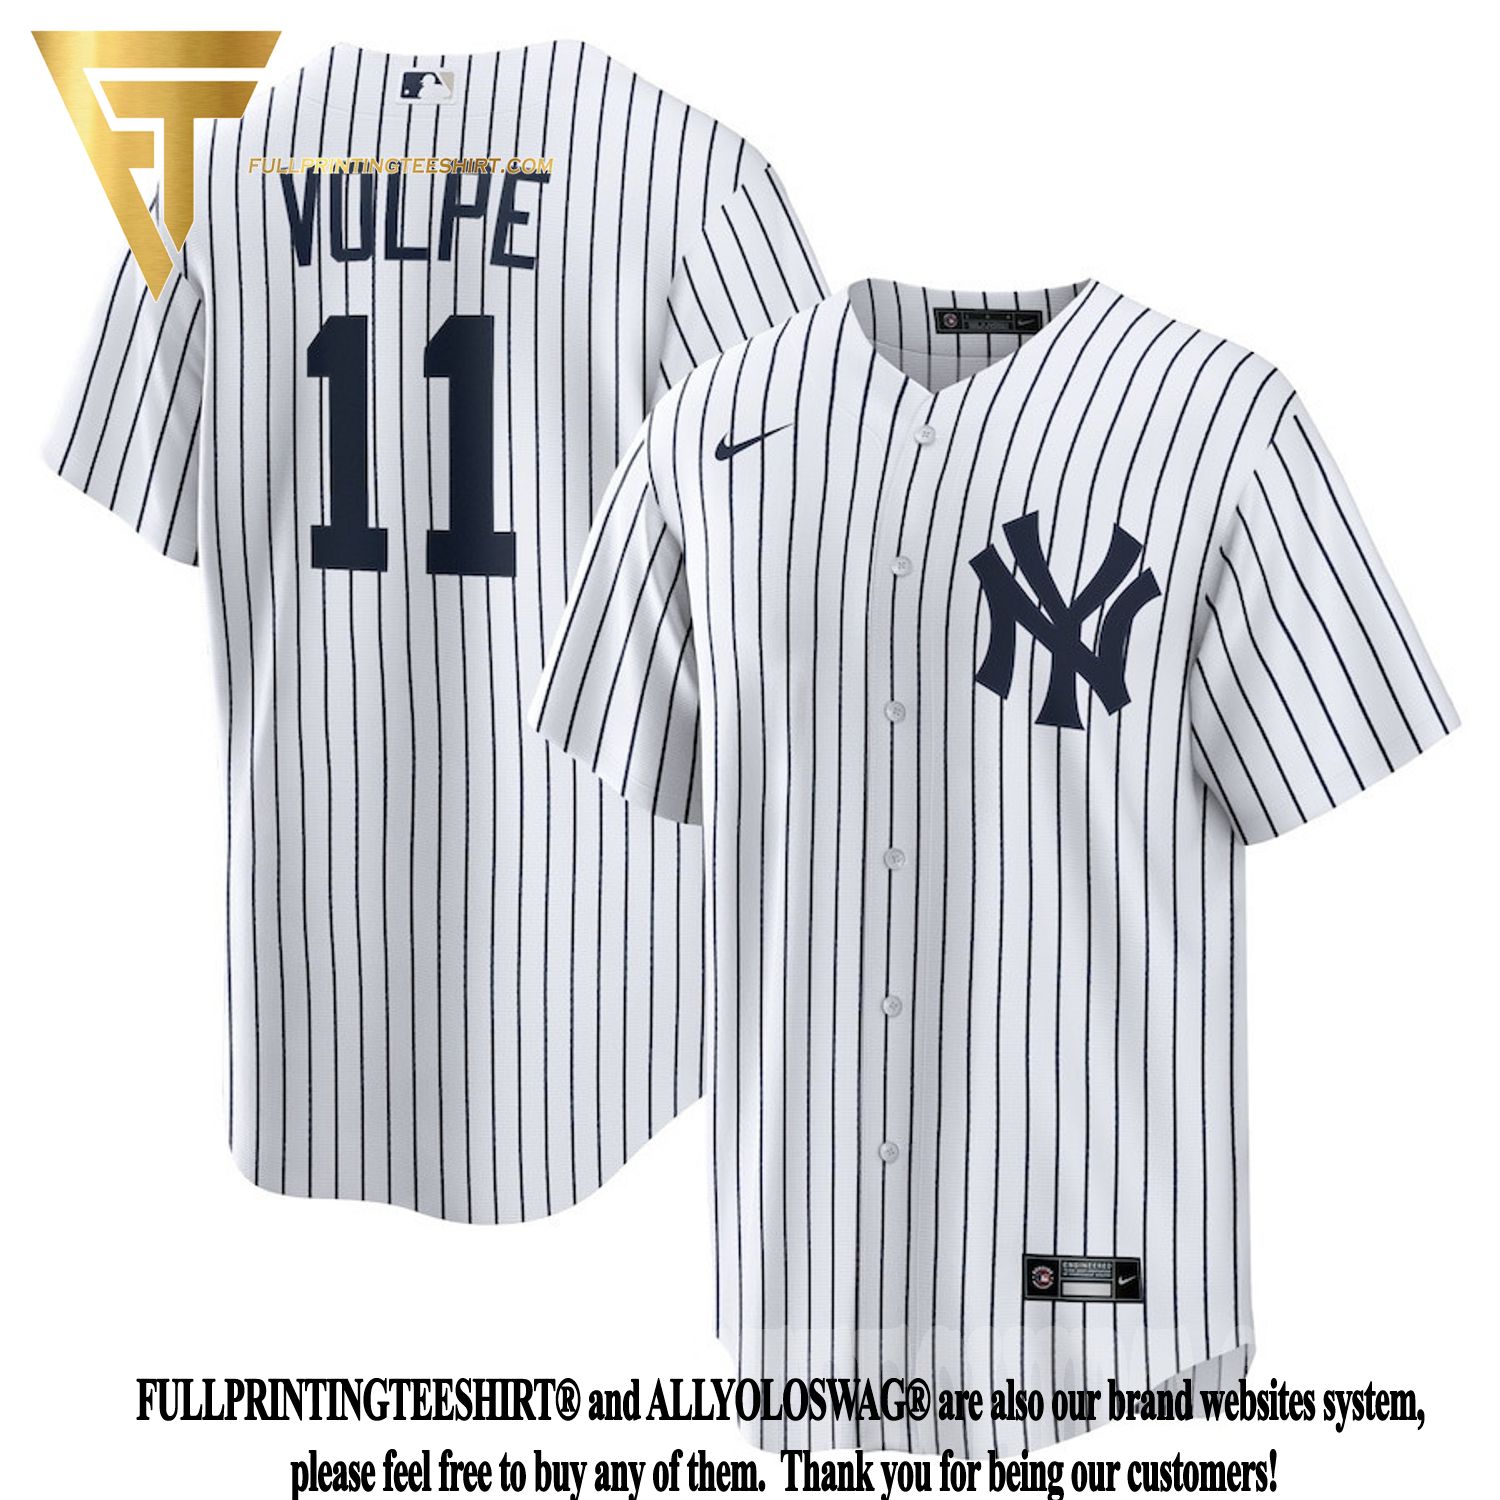 Anthony Volpe No. 11 jersey an instant fan favorite, sells out opening day